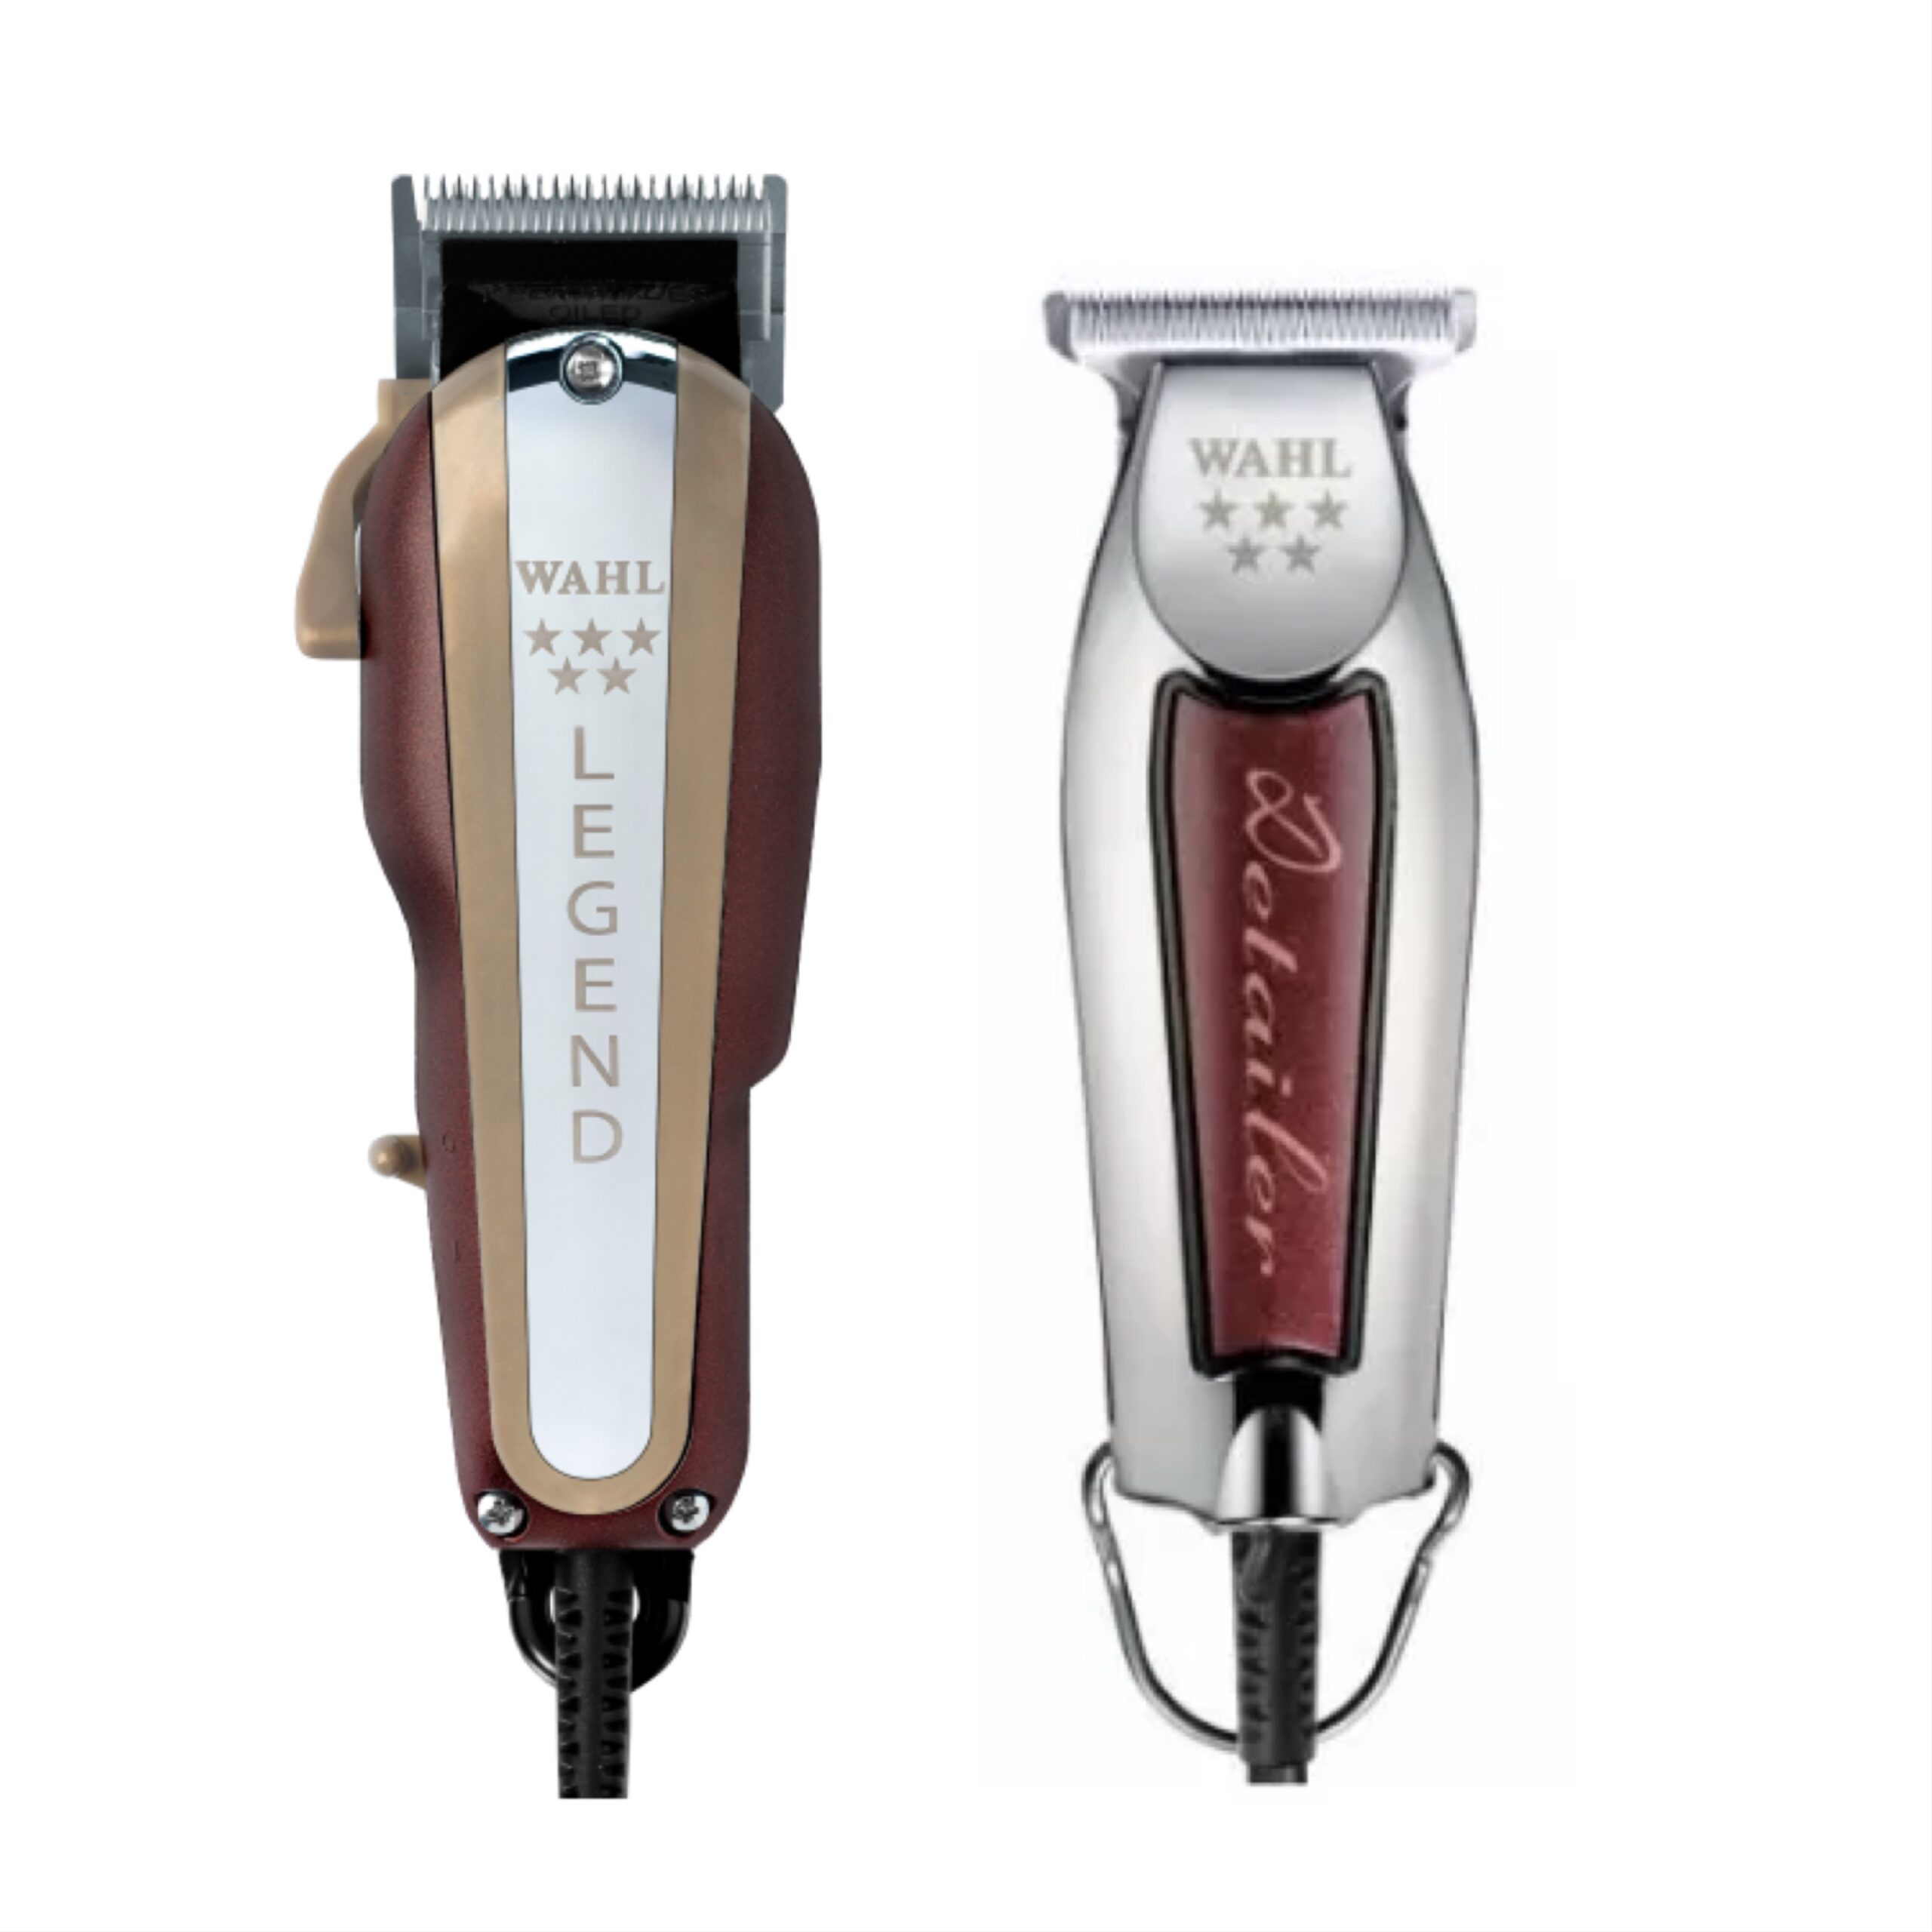 Wahl pro 2pc combo by ibs - Corded Legend & corded 5 star detailer T-wide